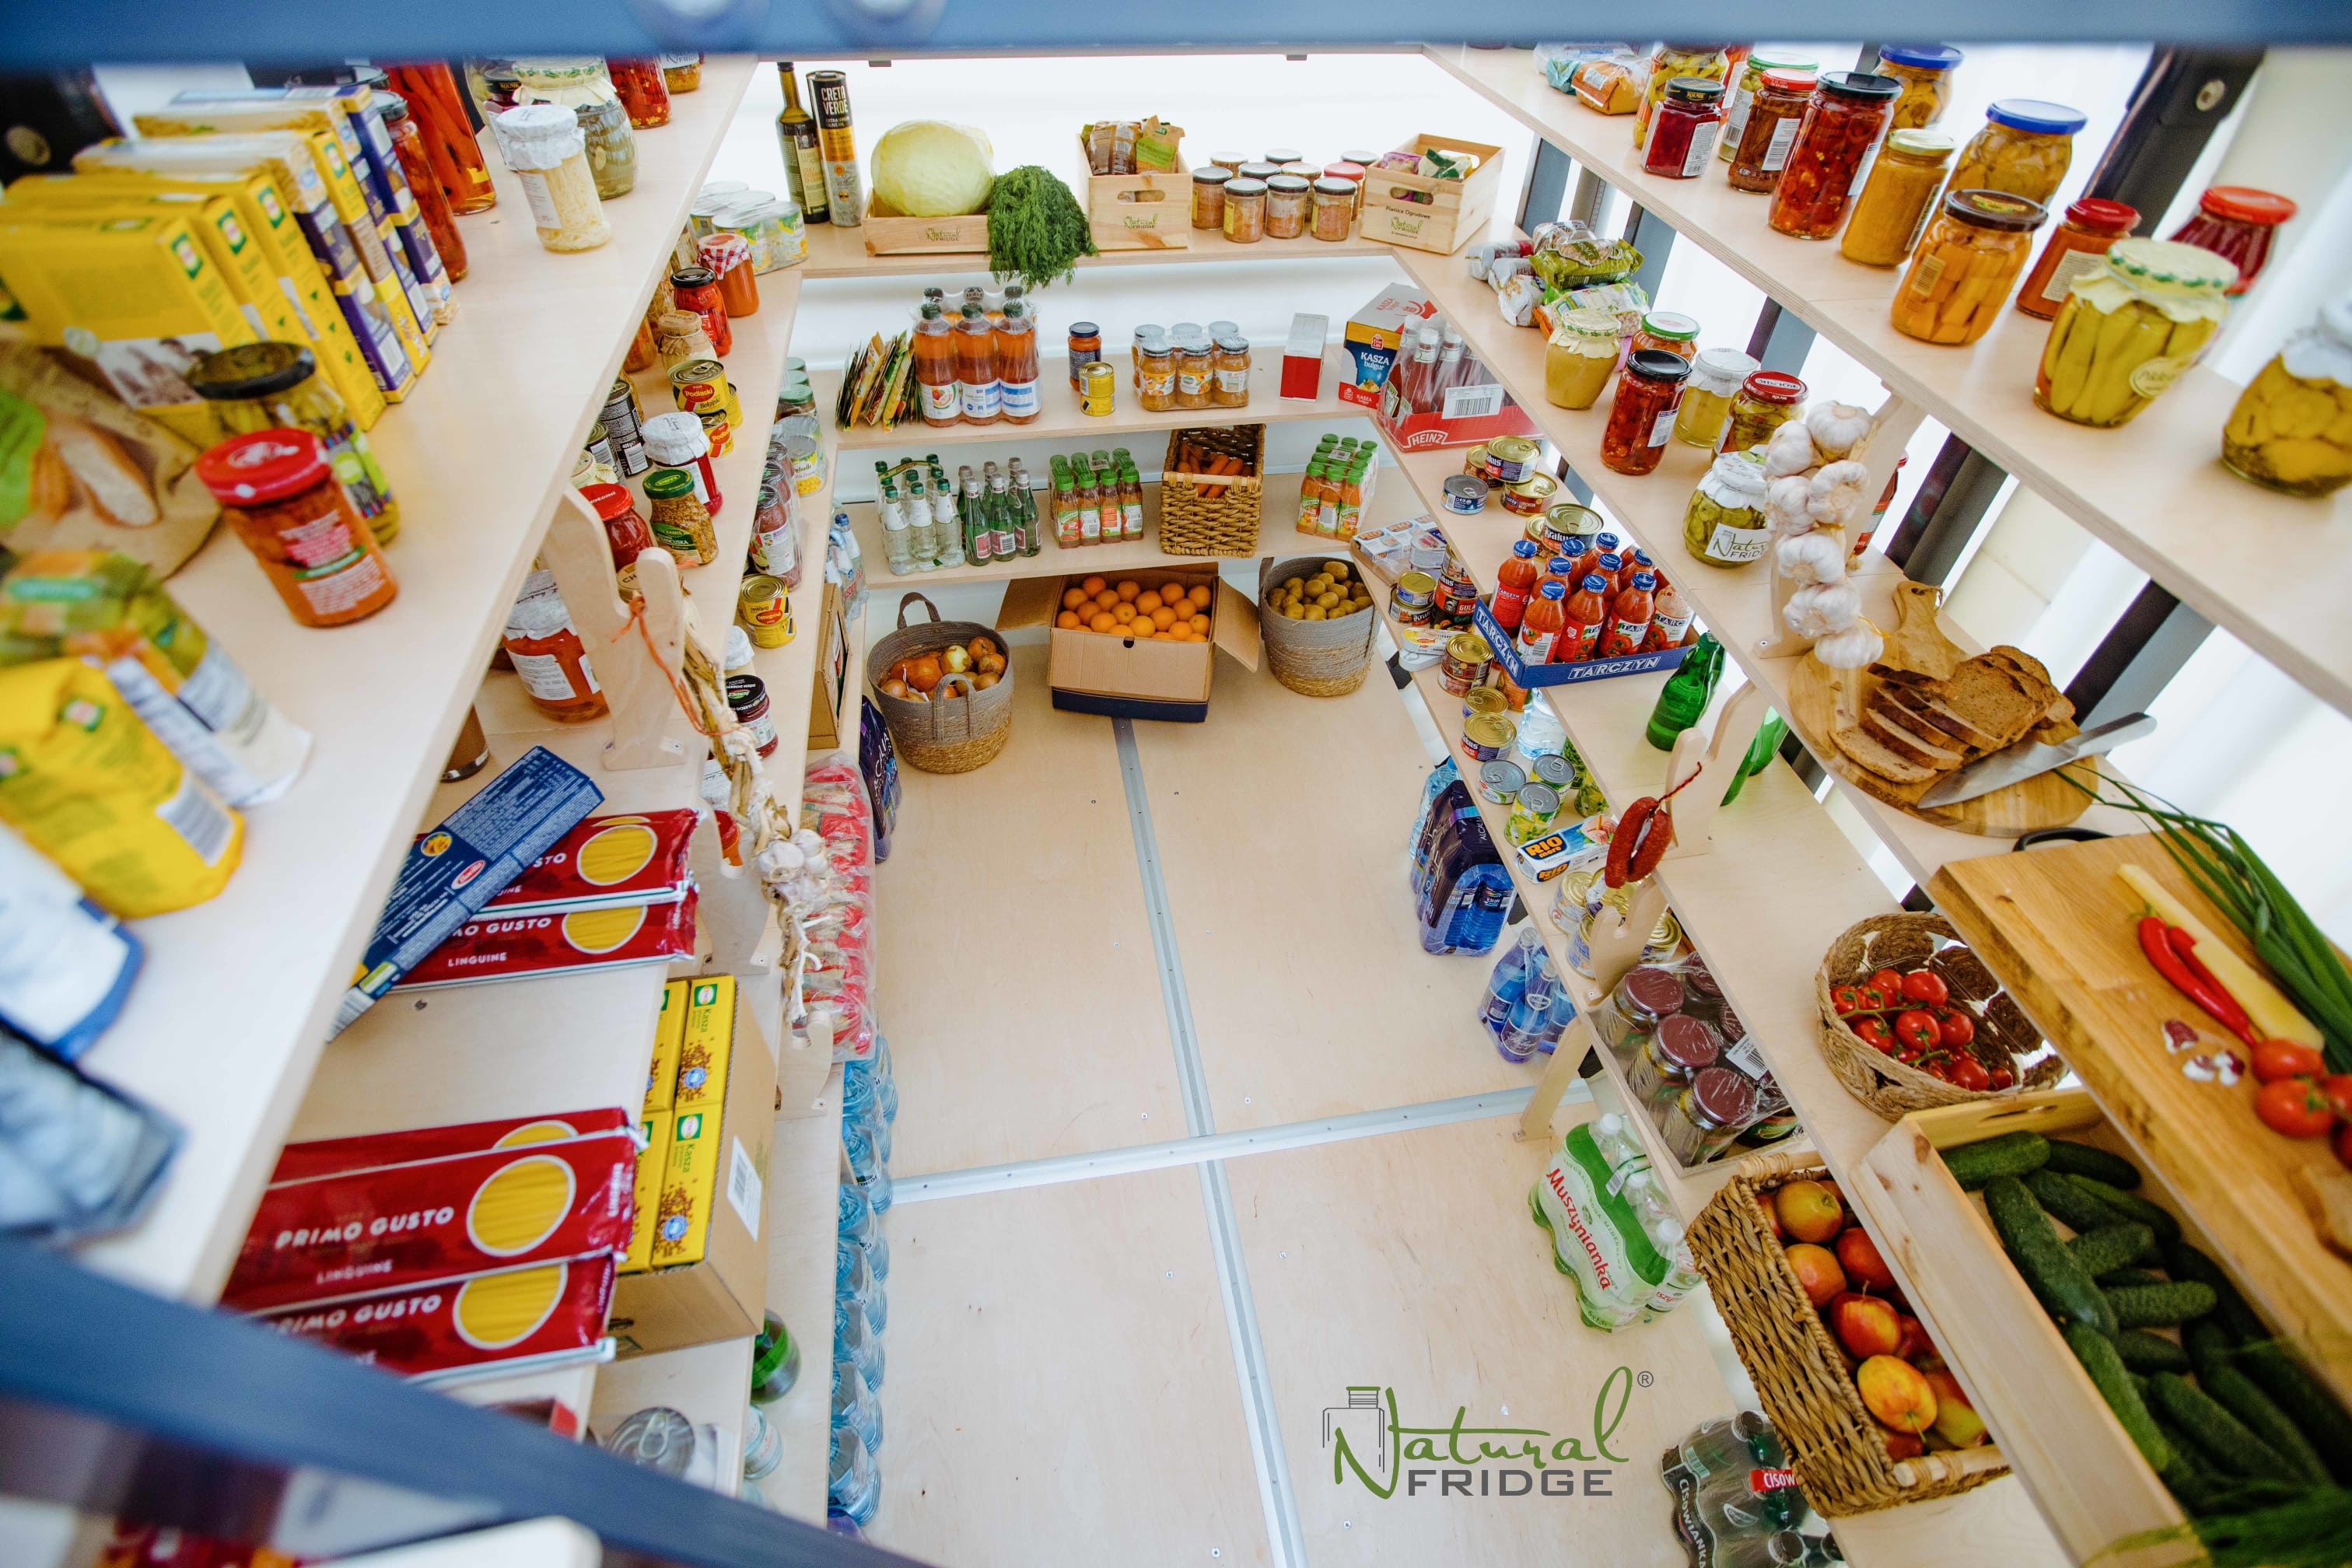 The cellar provides a lot of space inside. The floor area is up to 6.6 m2. This allows you to store many vegetables in bags directly on the floor. Arranging preserves on the shelves is very convenient. Cellar 200x330 Natural Fridge Gross price 9,019 EUR